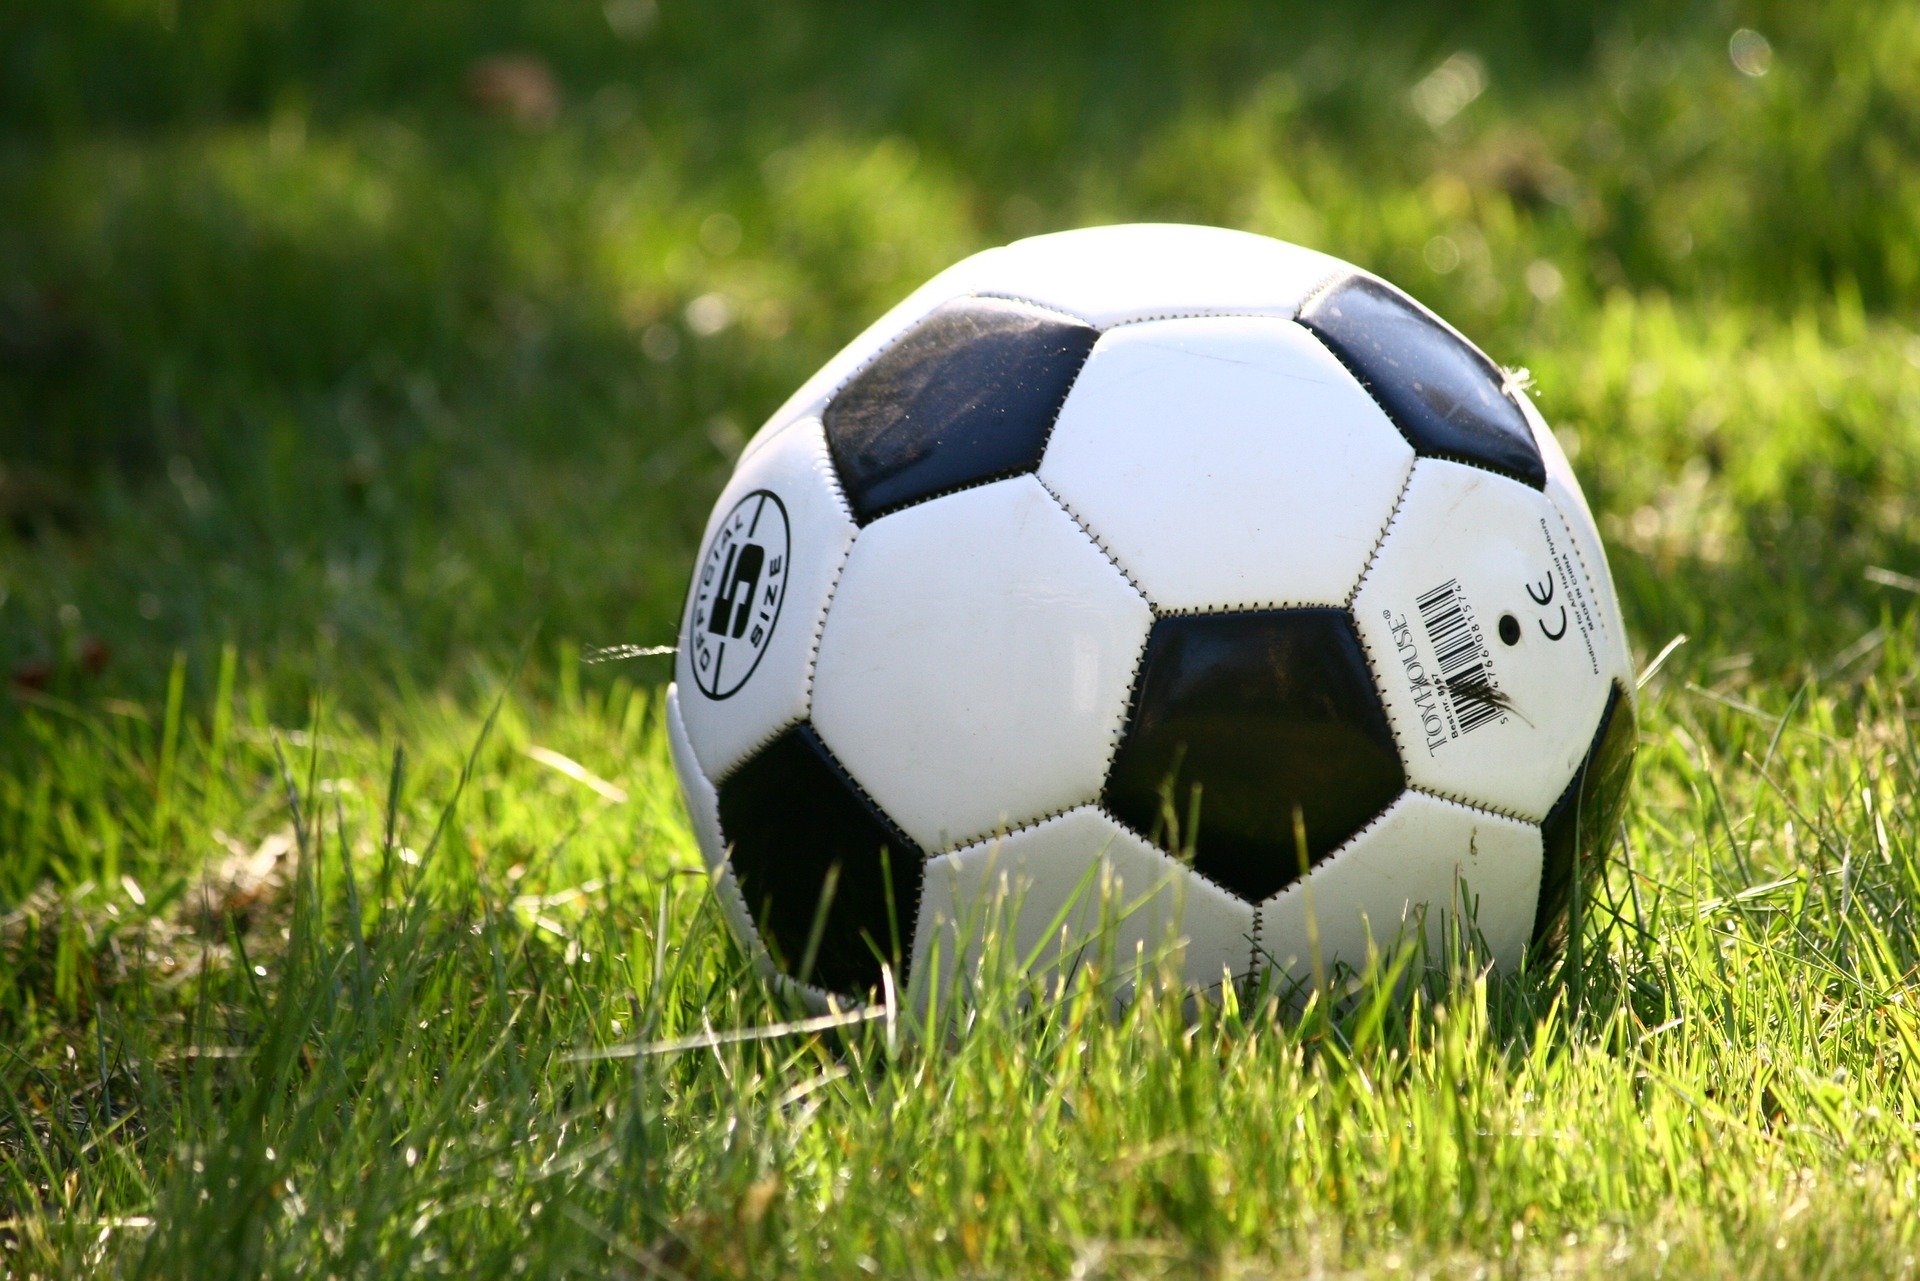 Fall Soccer Canceled Due to Safety Concerns